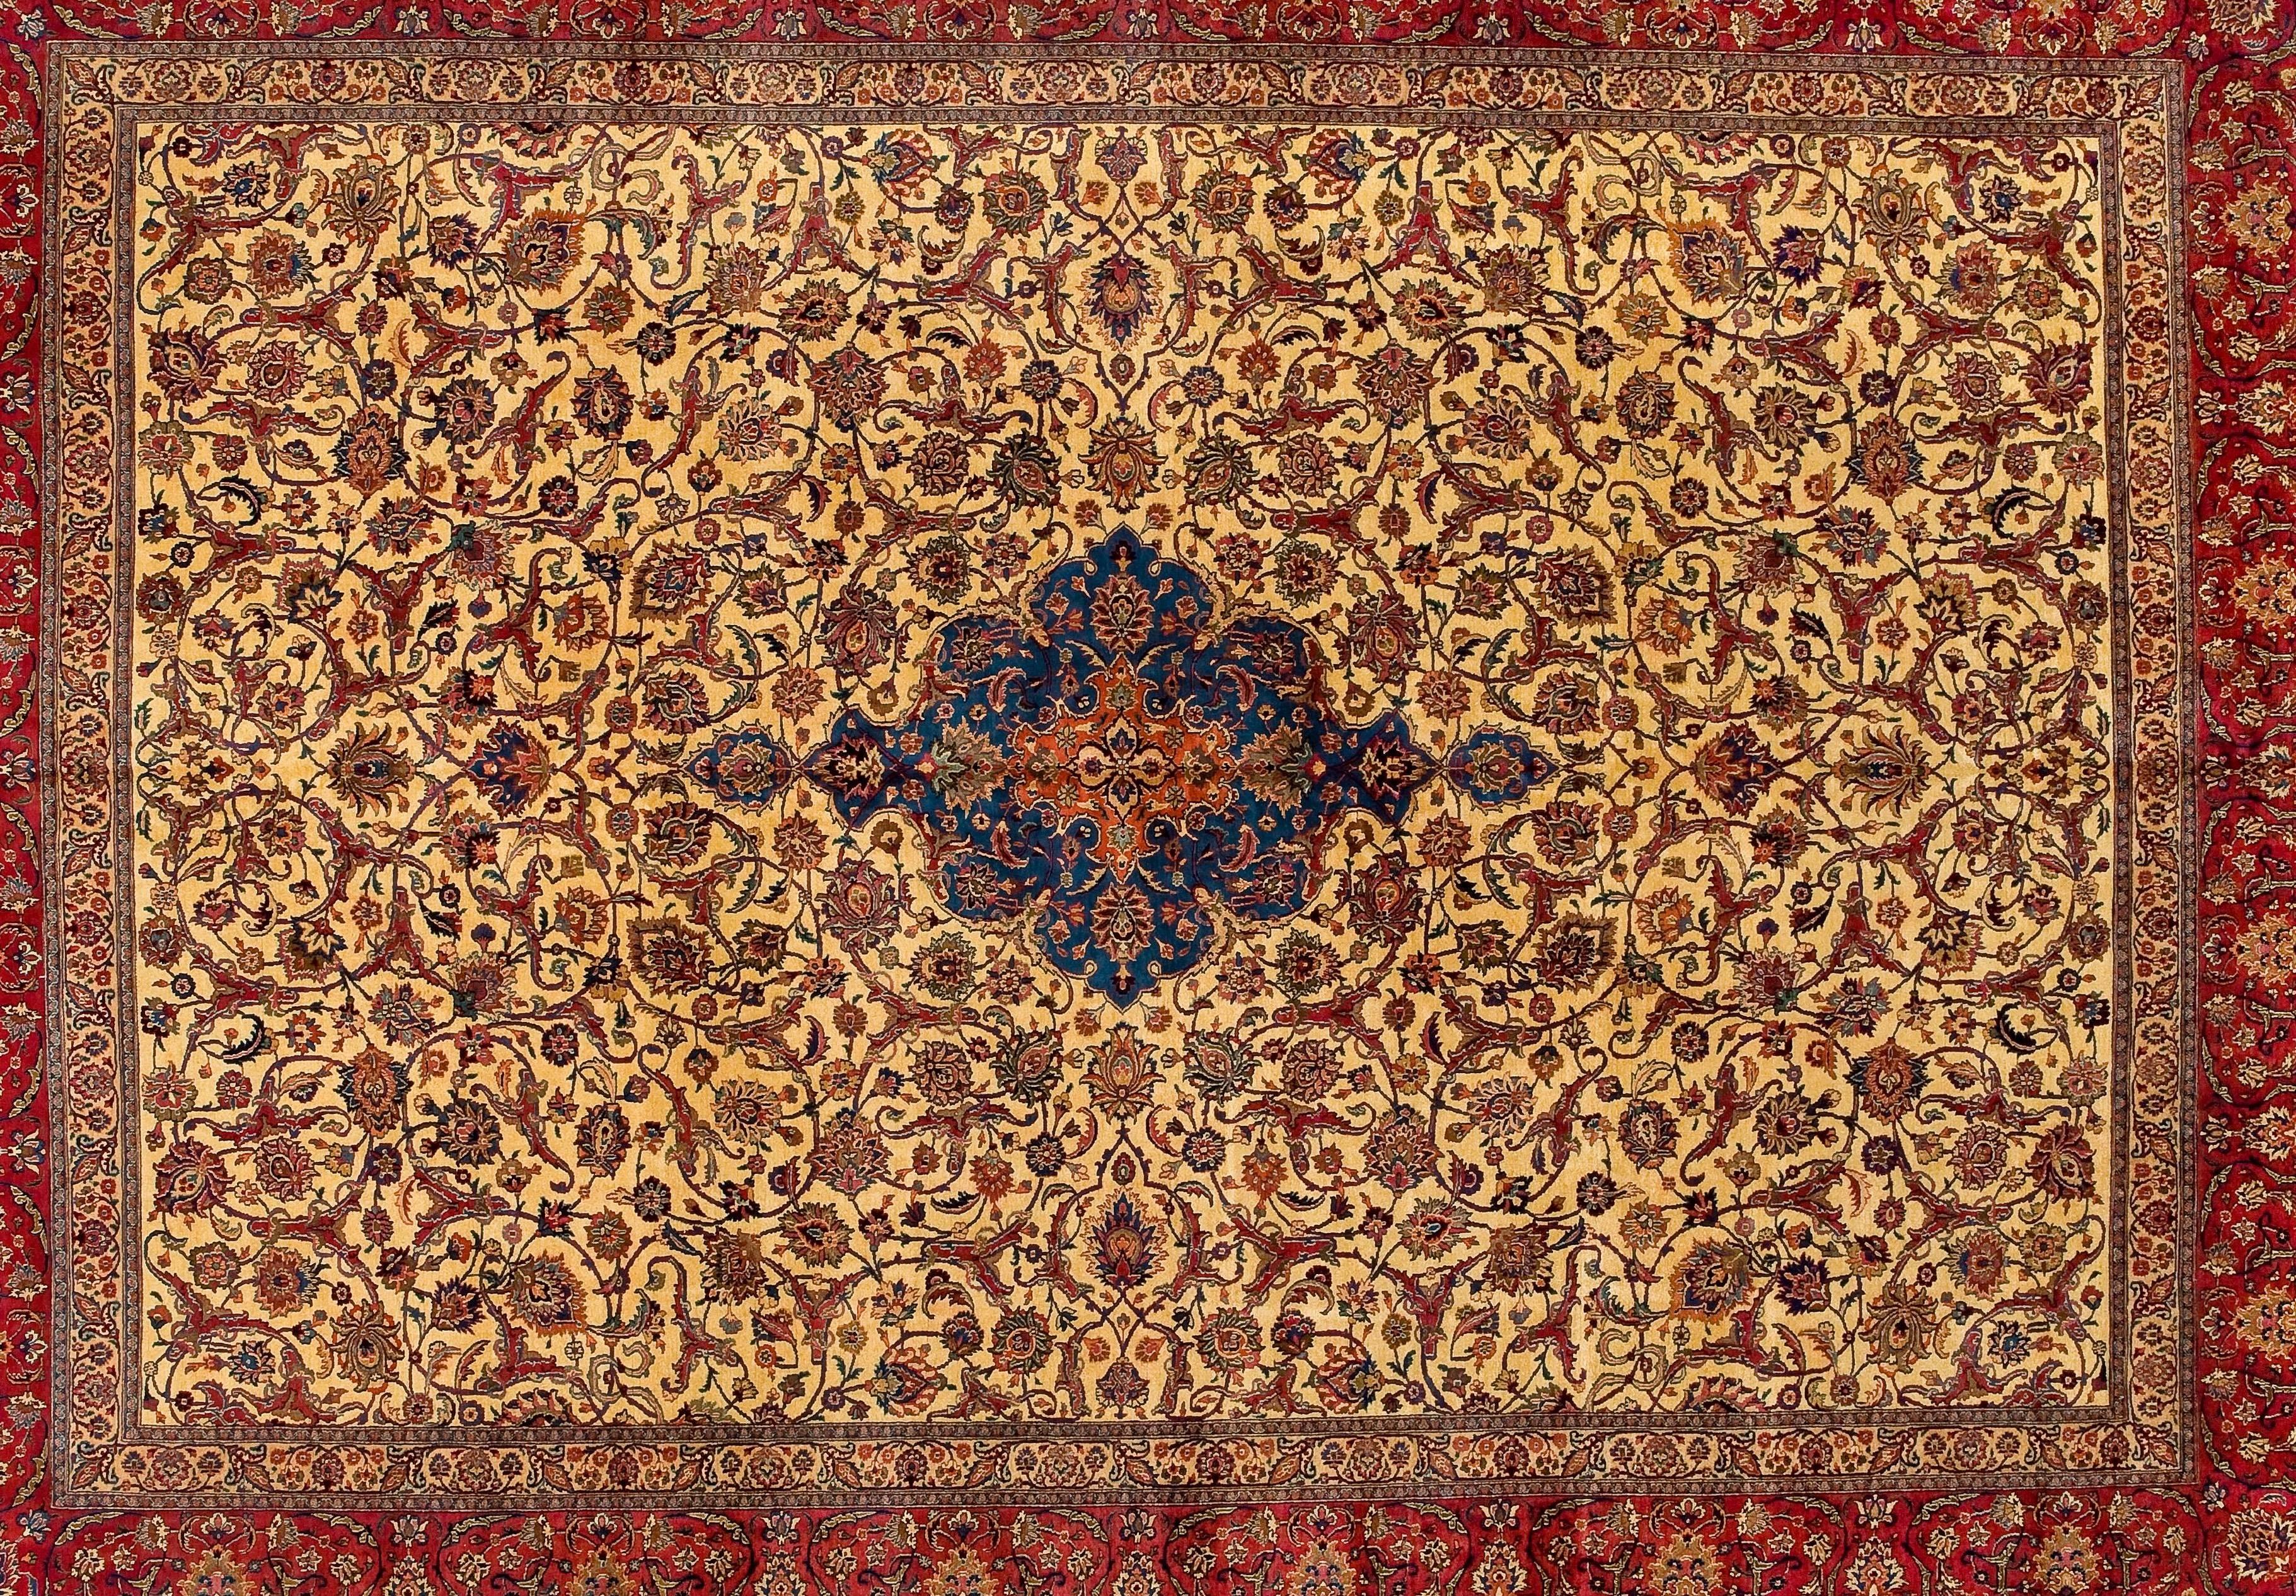 This Mashad Saber piece has at least 70 years old and represent some of the very finest examples of art from the time and place from which they originate. The complex methods and high-quality ingredients employed by the master rug makers ensured